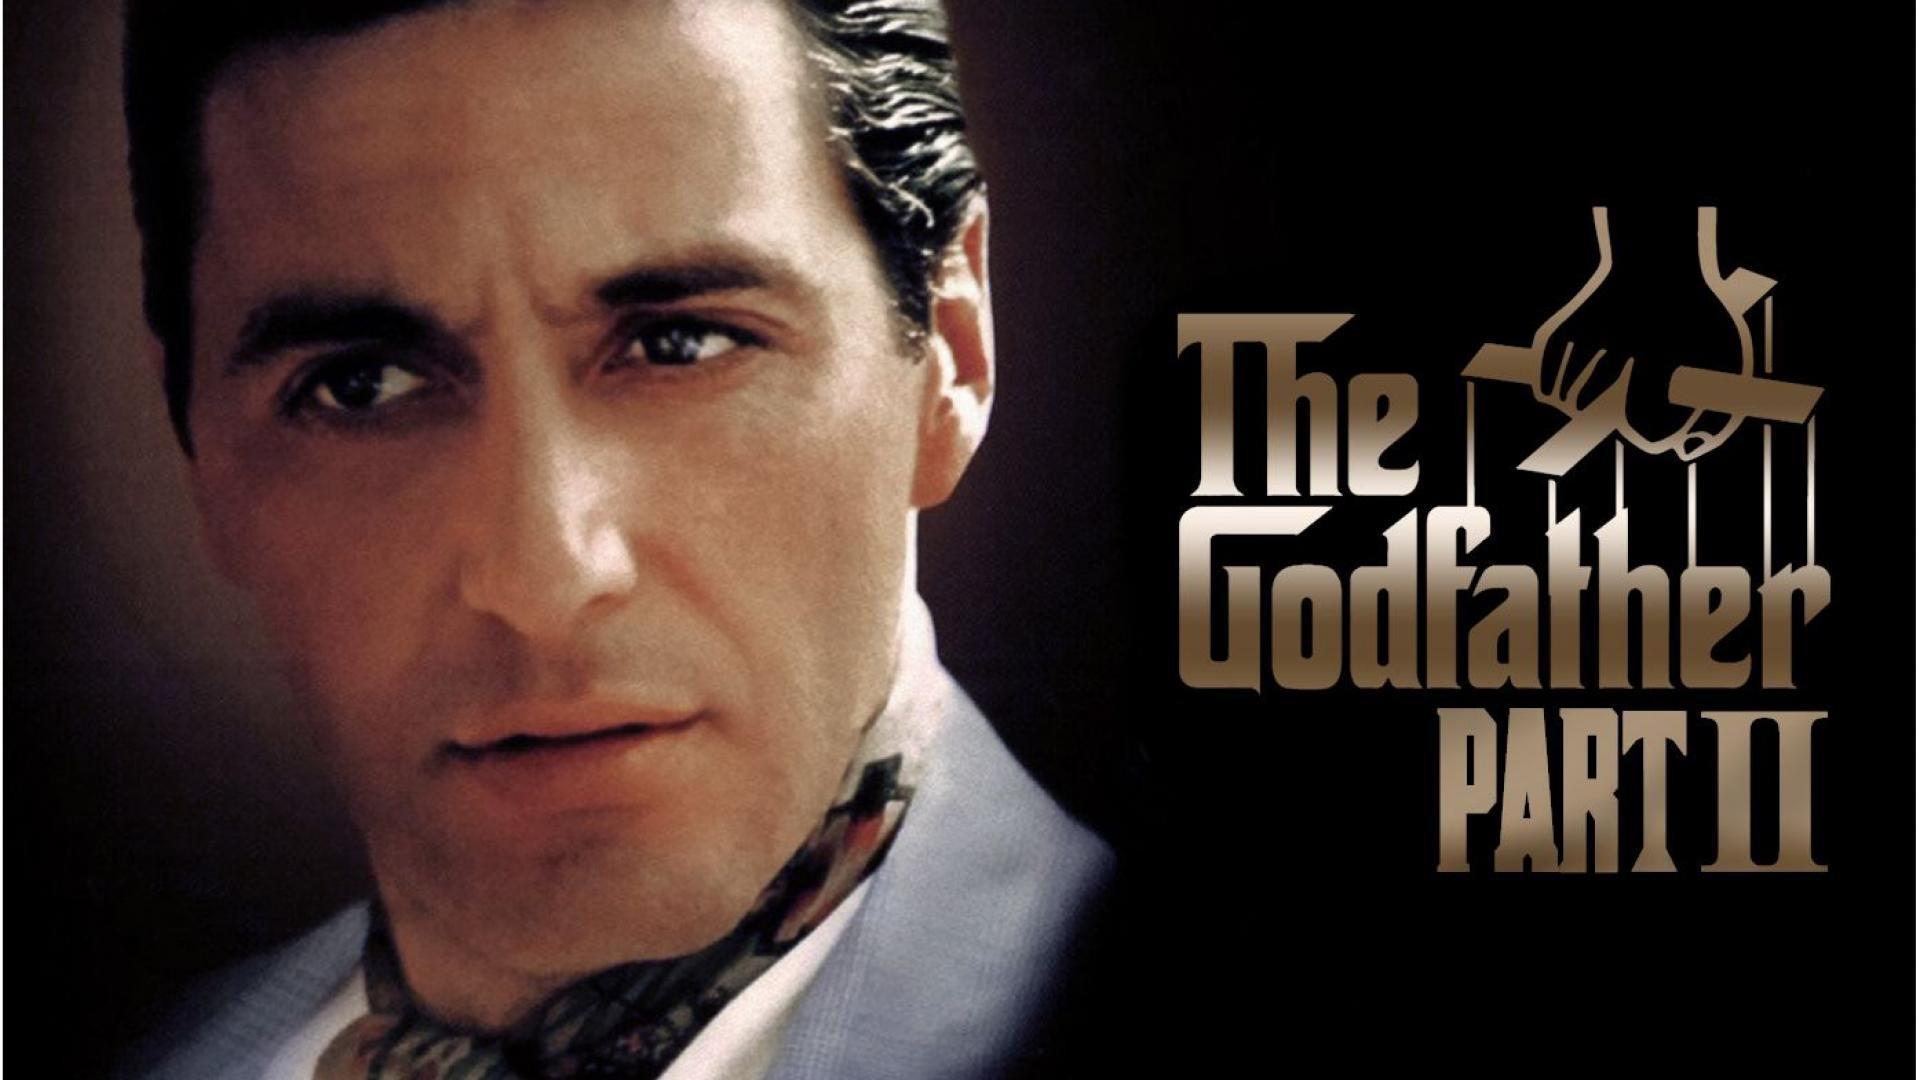 1920 x 1080 · jpeg - The Godfather Part II Wallpapers - Wallpaper Cave